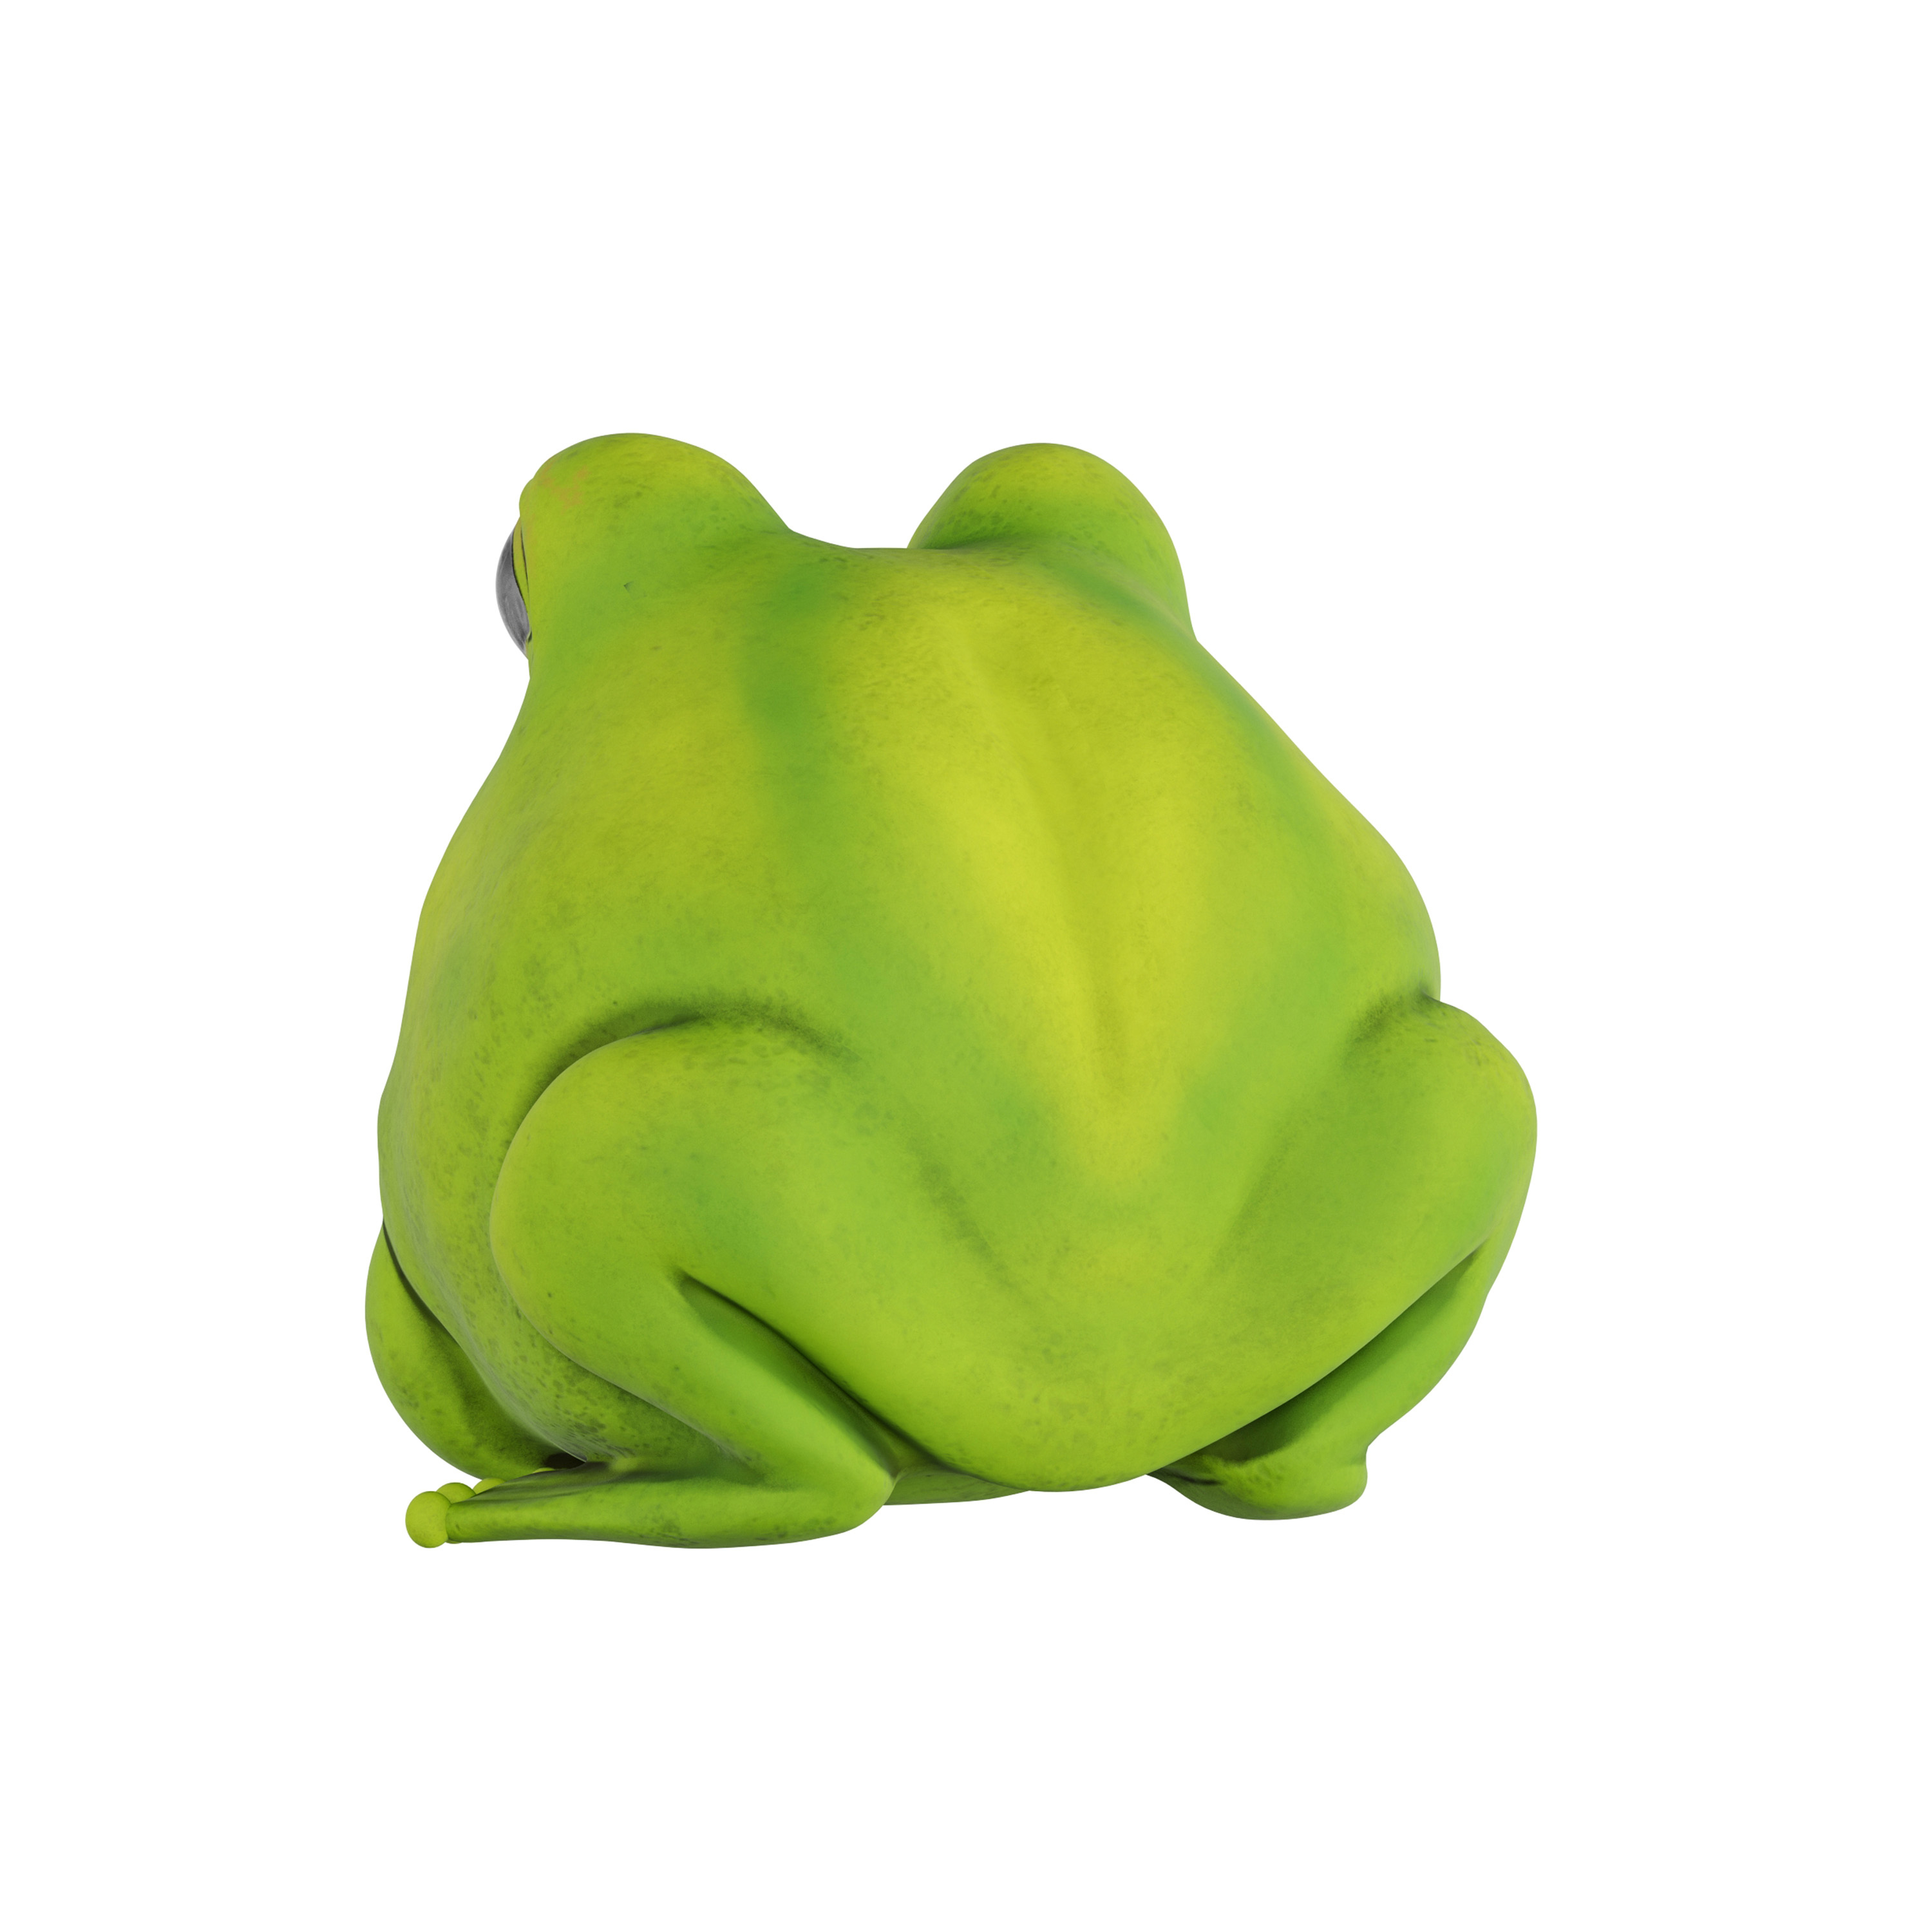 Cute Fat Frog Big Eyes Garden Flower Bed Decor Bright Green Bullfrog With Smile